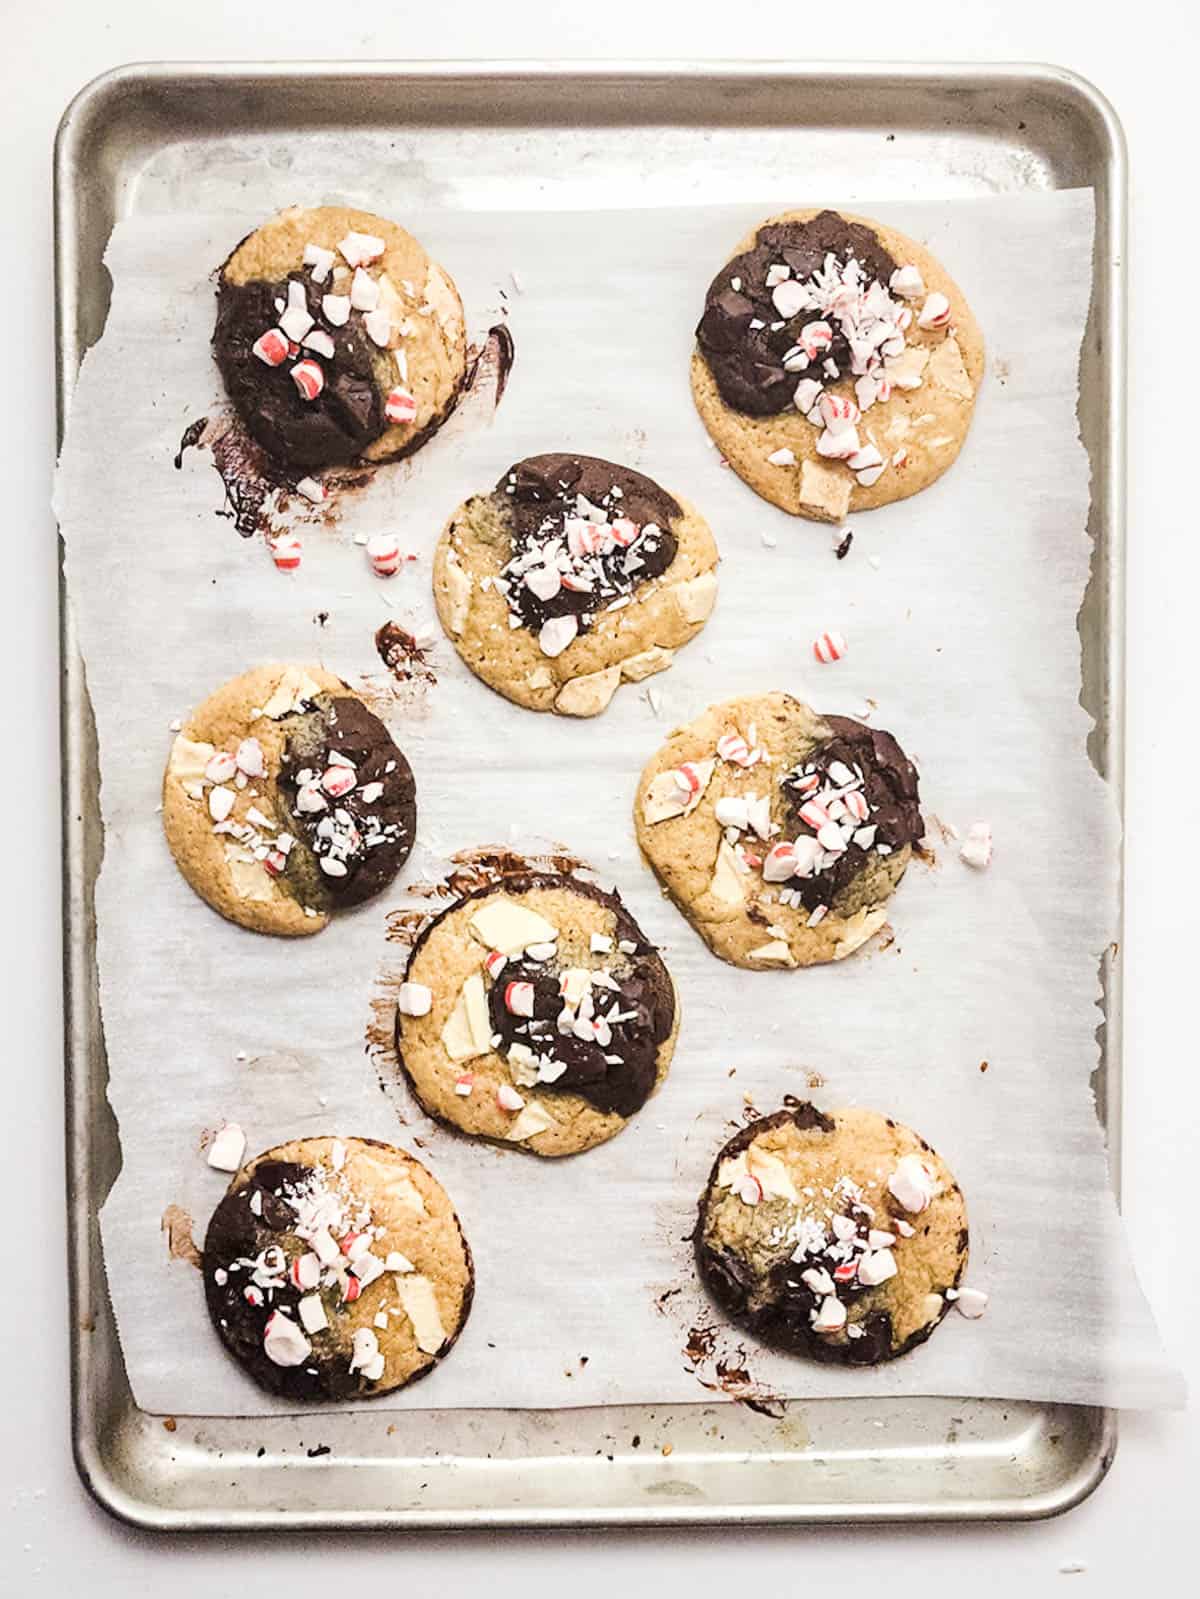 Baked chocolate marble cookies with crushed peppermint and white chocolate shavings on a parchment paper lined baking tray.